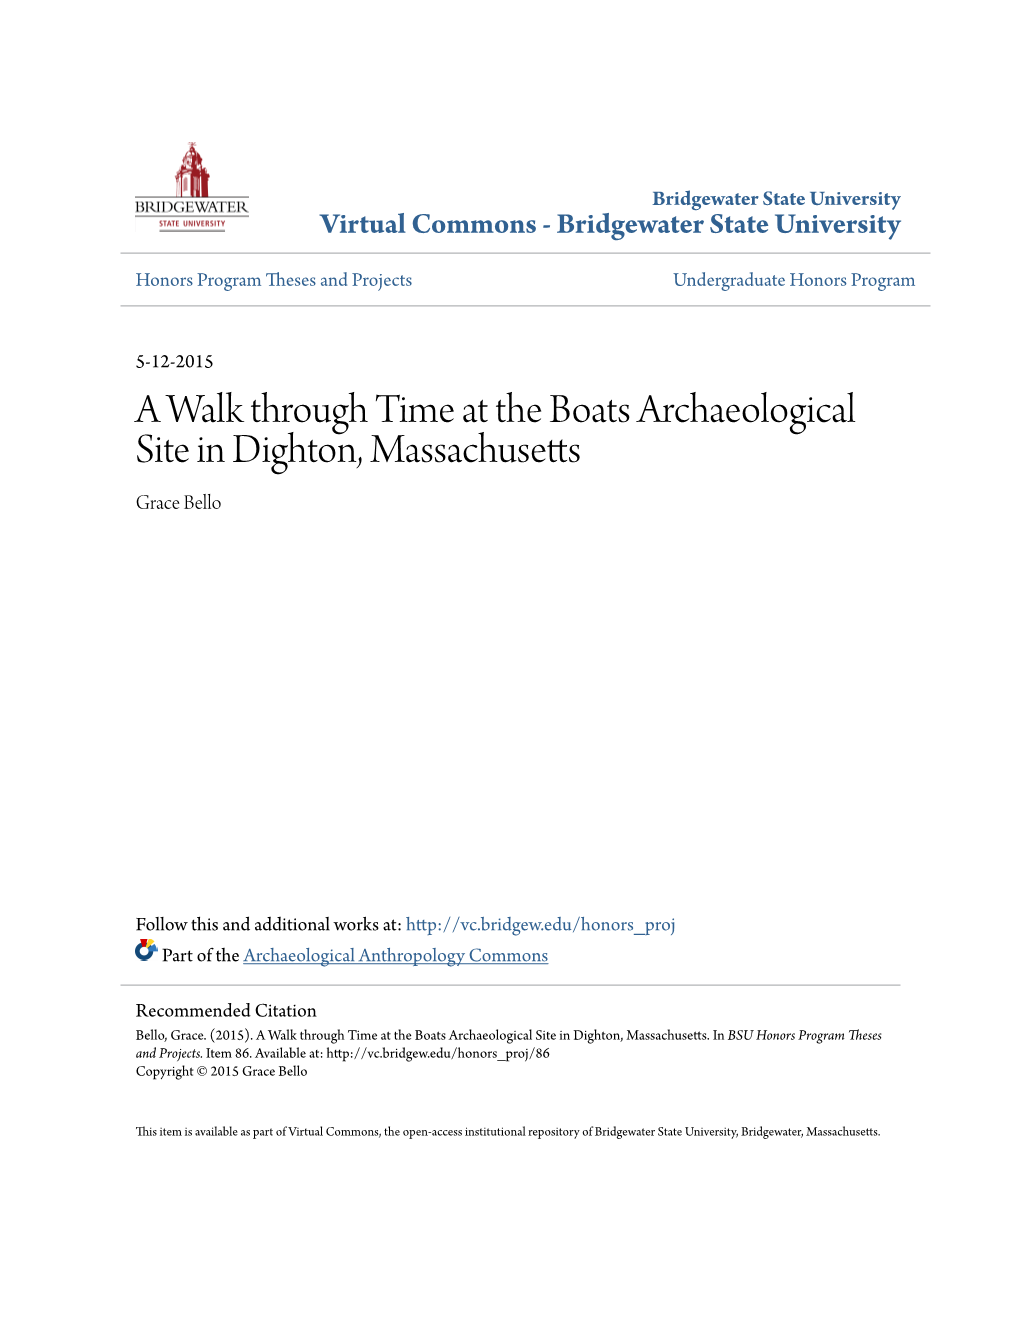 A Walk Through Time at the Boats Archaeological Site in Dighton, Massachusetts Grace Bello